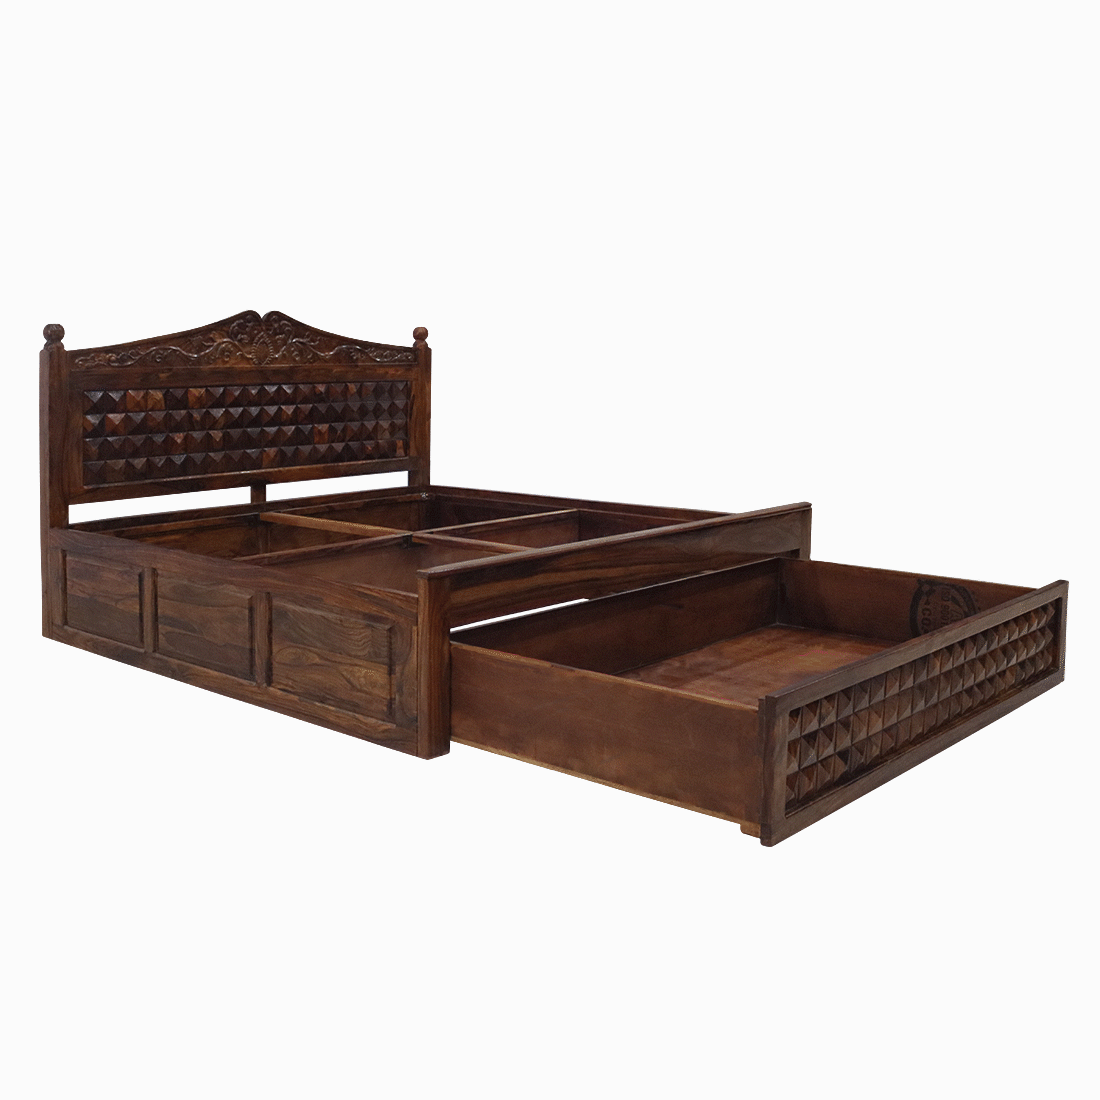 AARAM By Zebrs Furniture House Double Bed with Box Storage